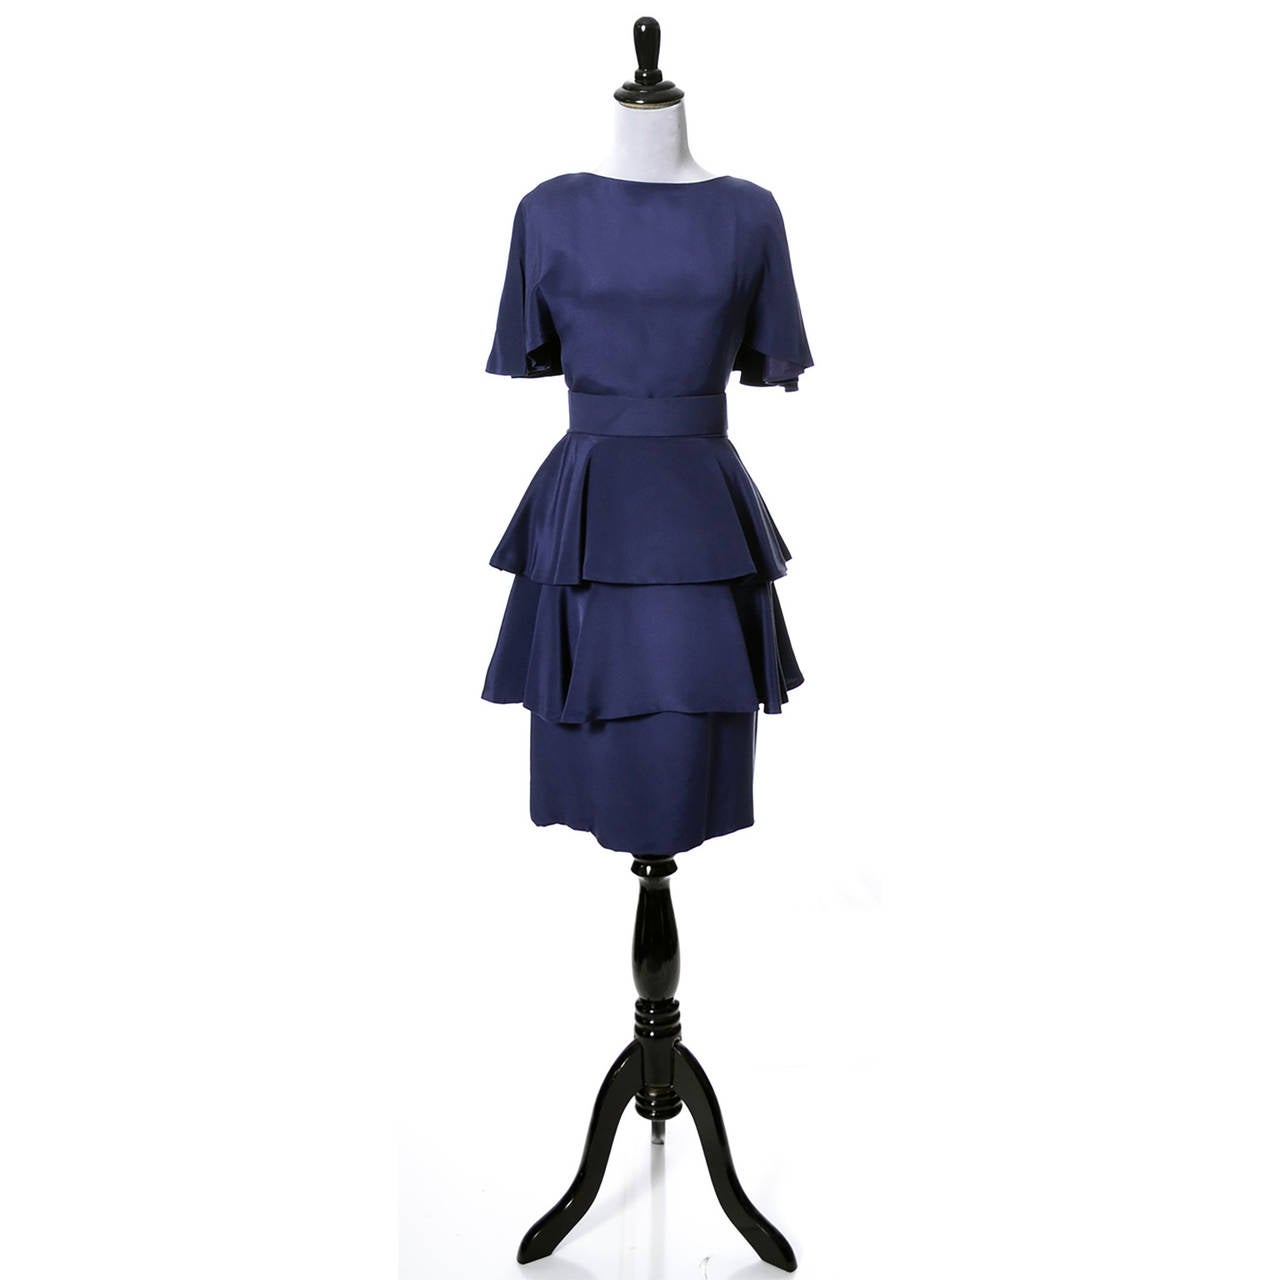 This pretty blue vintage dress was purchased at Neiman Marcus in the early 1980s. The dress has its original fabric belt, a back zipper and a slim skirt under 2 layers of gentle ruffles. The dress is actually sleeveless with an attached 